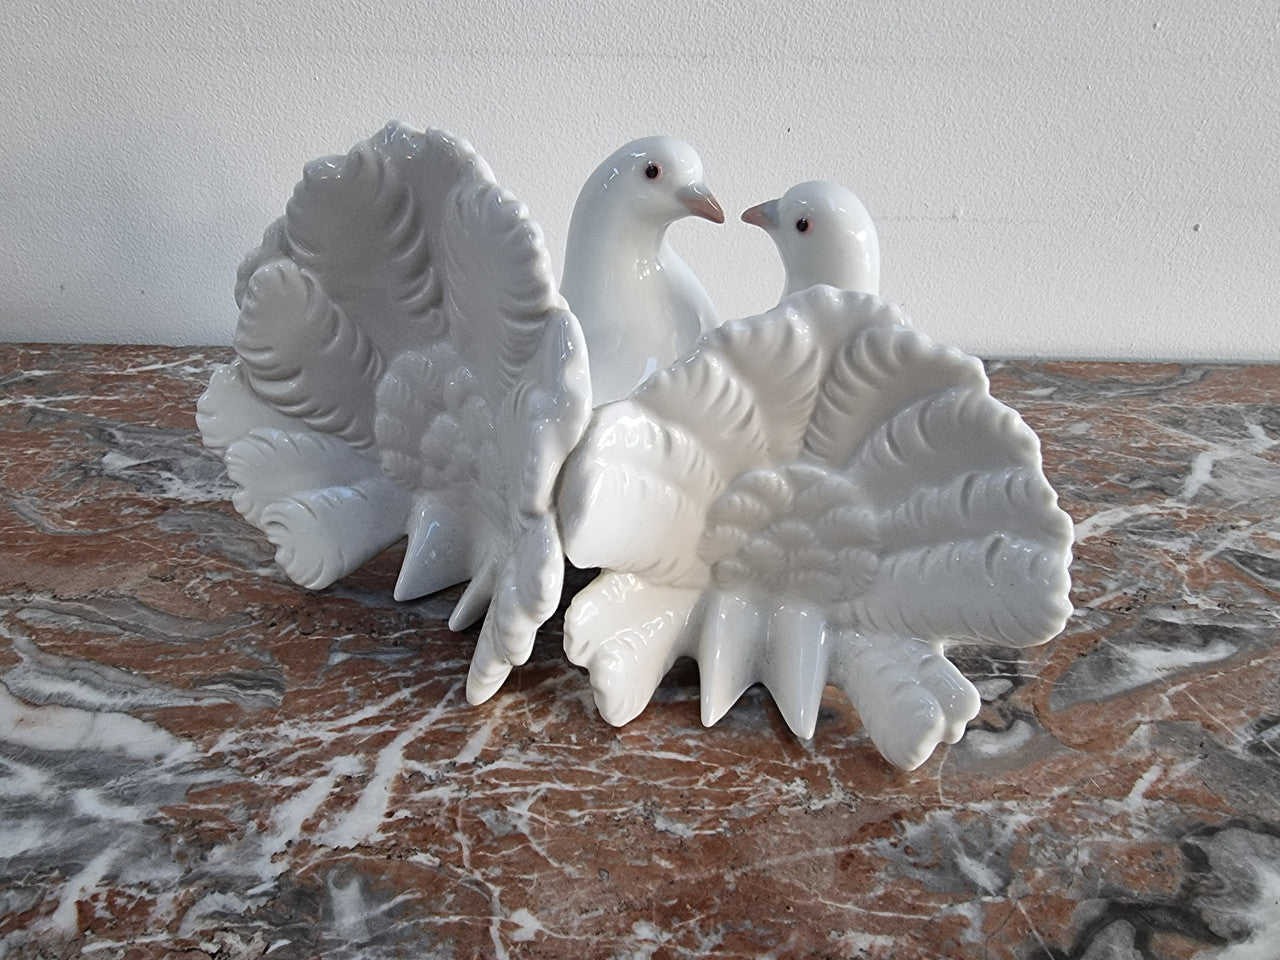 Delightful Vintage pair of “Lladro” porcelain figurine Doves. In good condition please view photos as they help form part of the description.